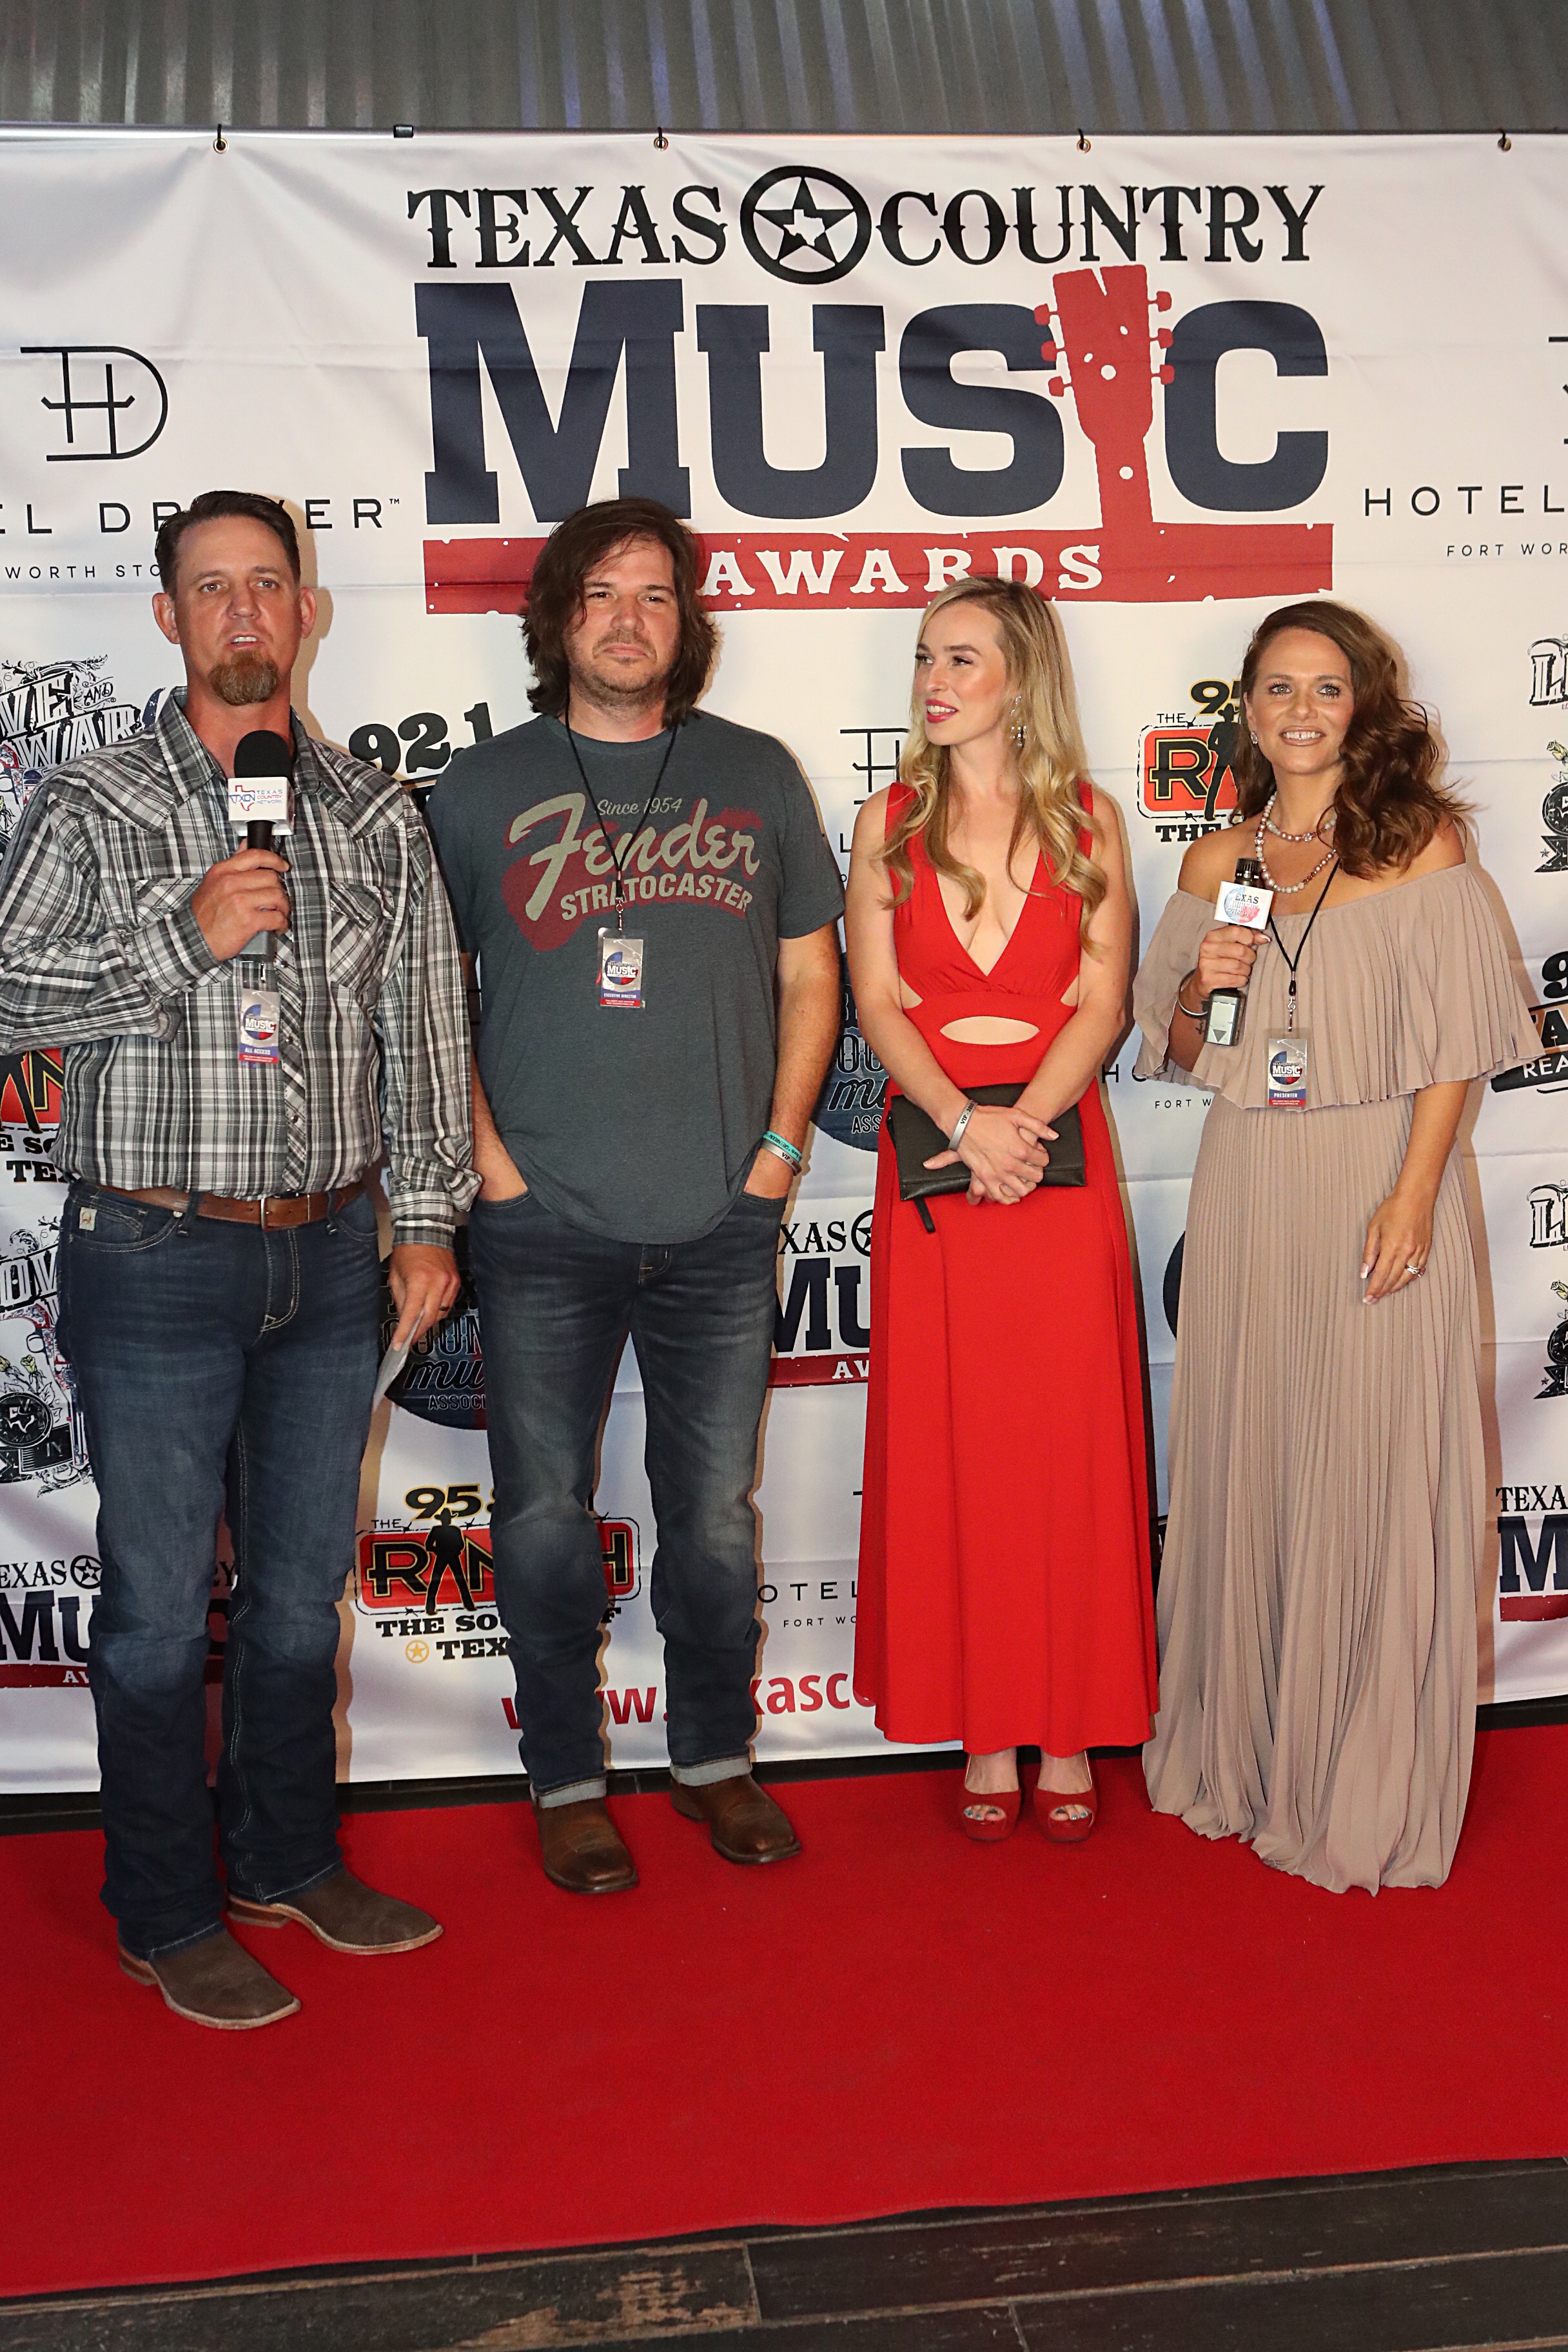 The Texas Country Music Awards 2019 Spotlighted Great Artists